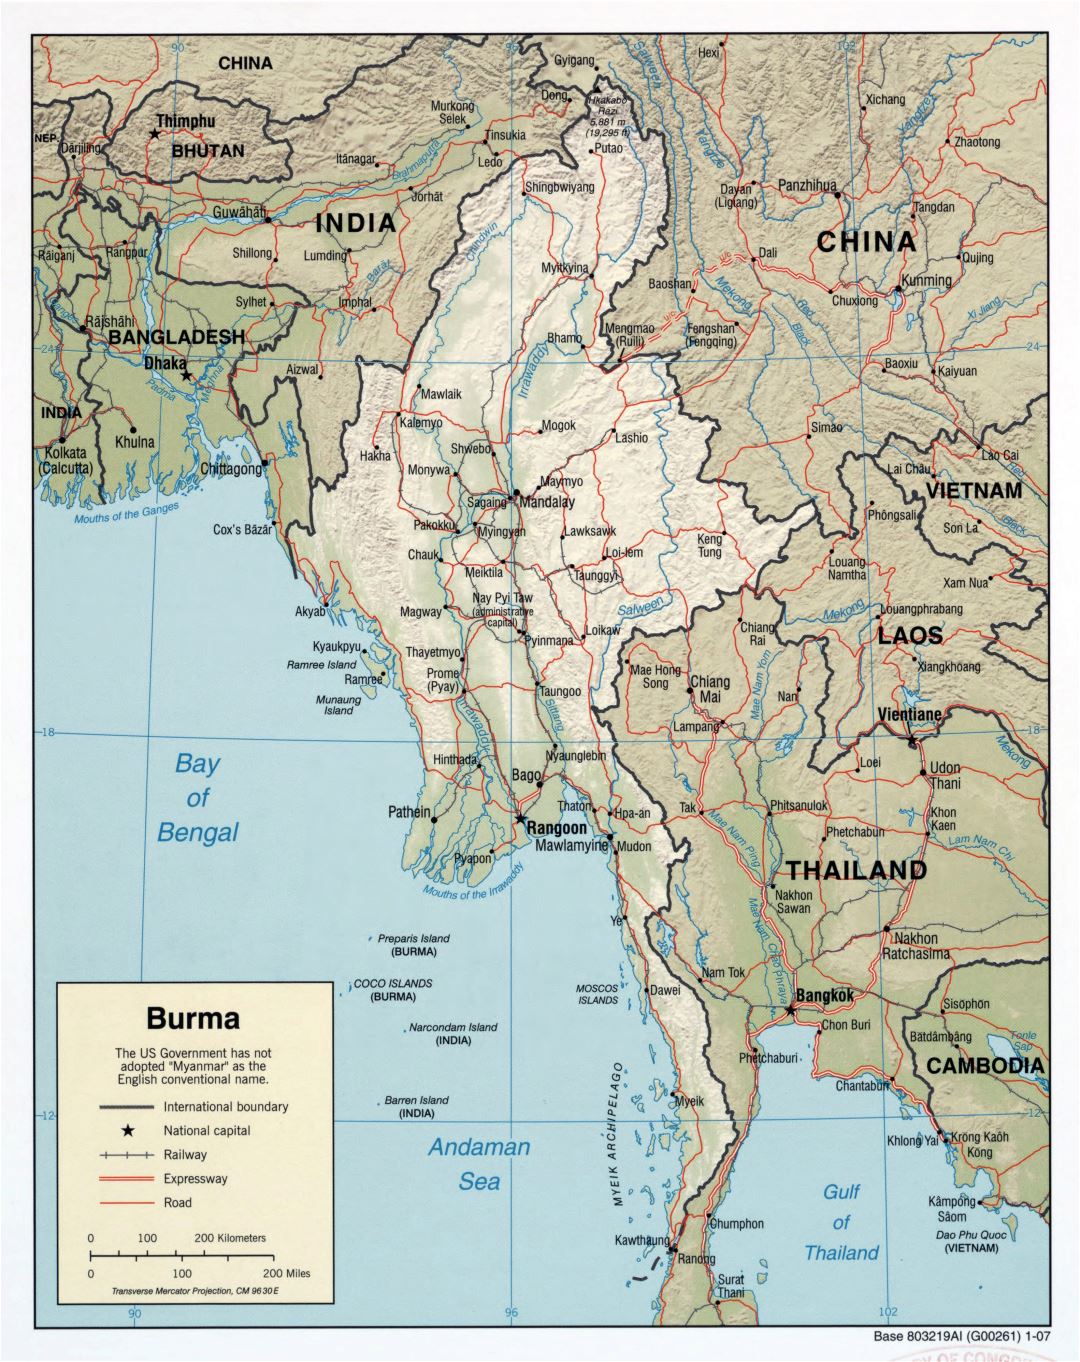 Large scale political map of Burma (Myanmar) with relief, roads, railroads and major cities - 2007